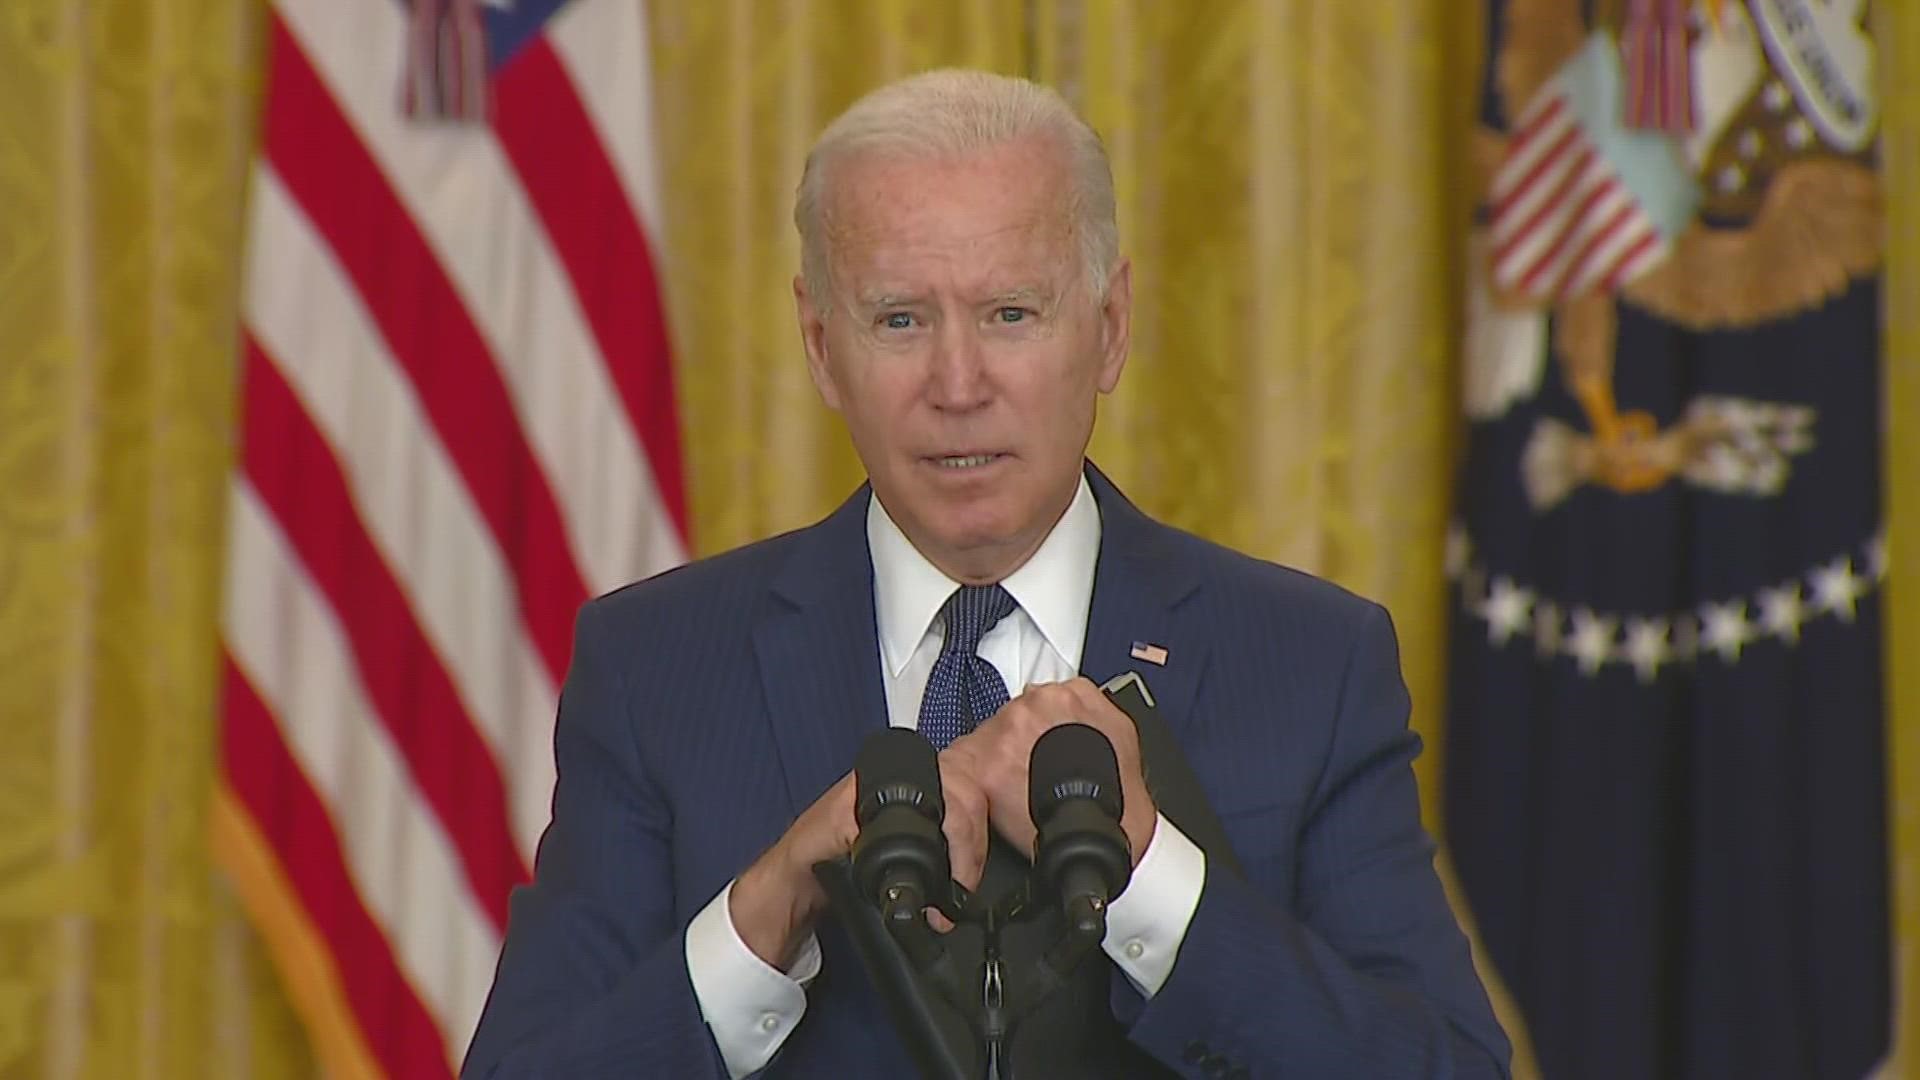 President Joe Biden said the reason no troops died from February 2020 until Thursday's attack was due to a peace deal with the Taliban.